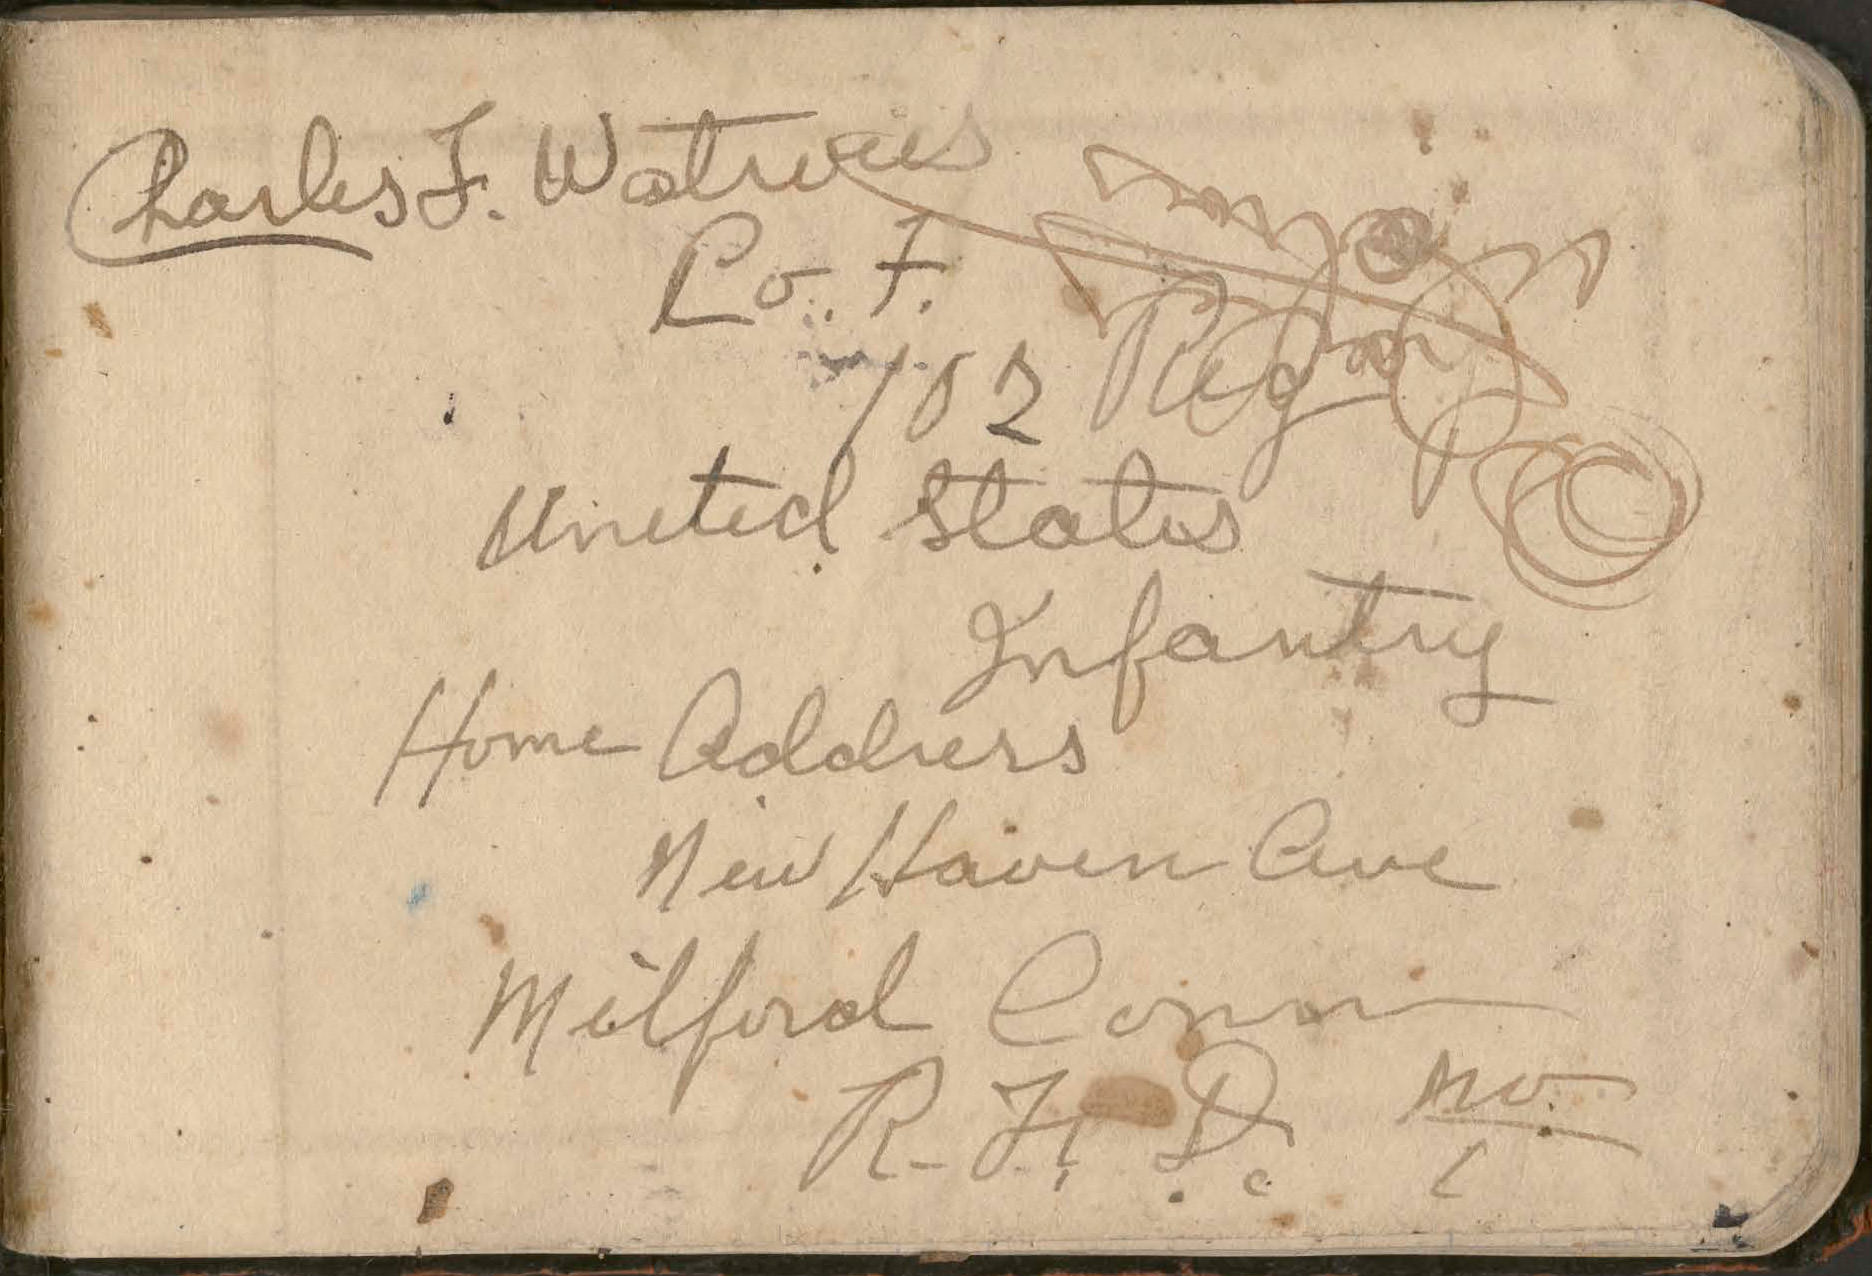 Inside cover of Watrus diary with his signature and address